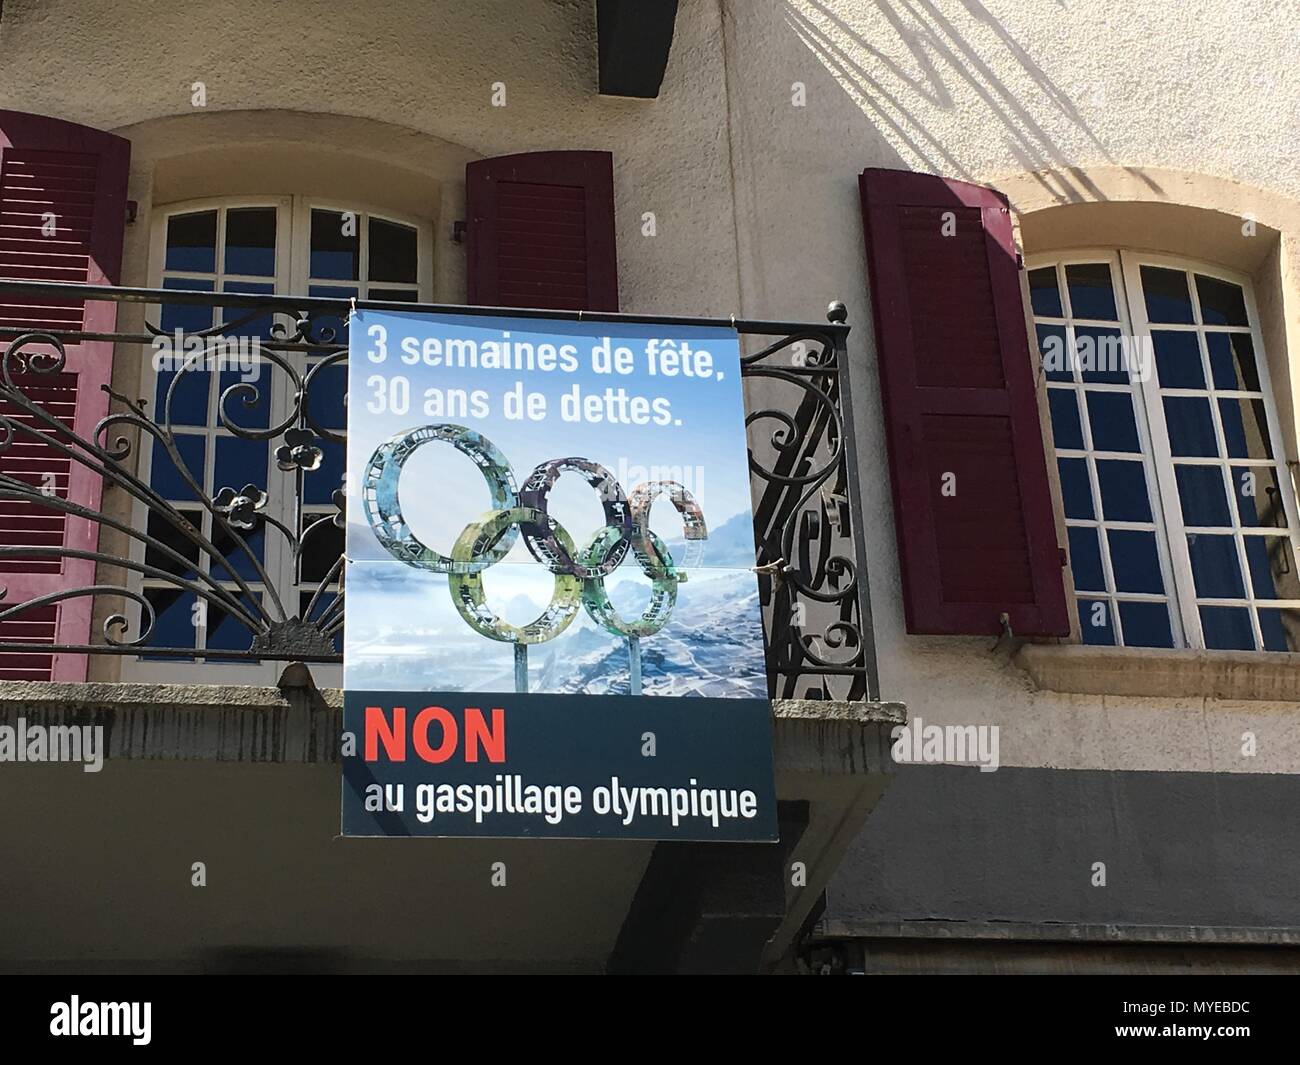 FILED - 14 May 2018, Switzerland, Sion: A poster of opponents of an  application for the 2026 Olympic Games hangs on a balcony. "3 weeks hard  and 30 years debt" is it.